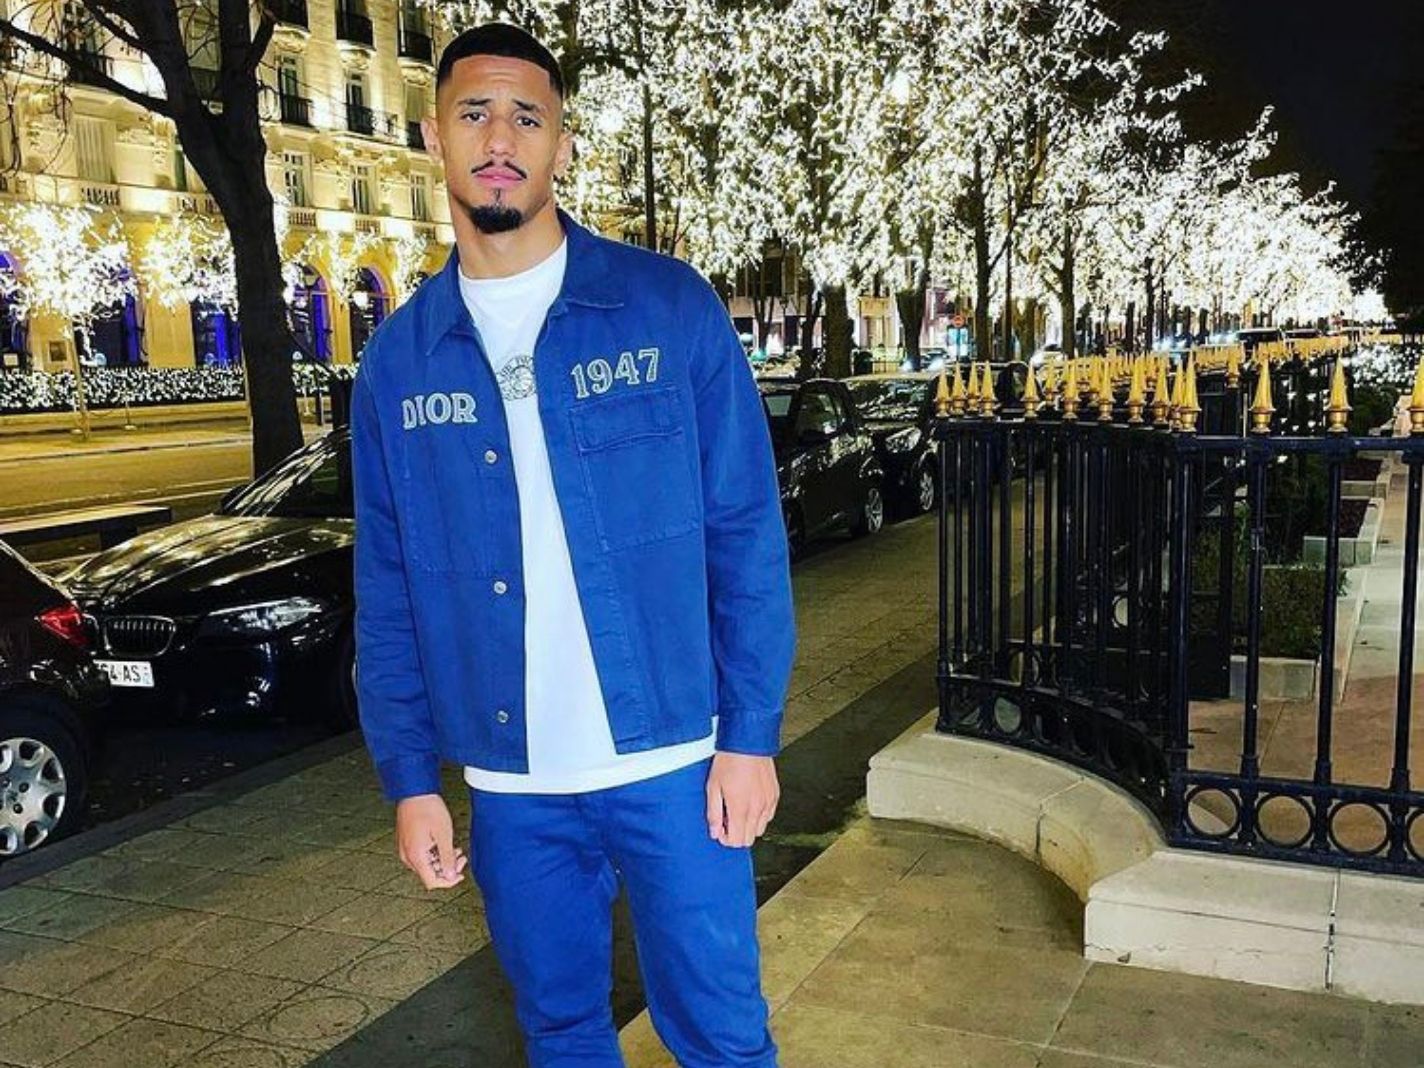 William Saliba rocks full Dior look for night out in town – Here’s what it costs